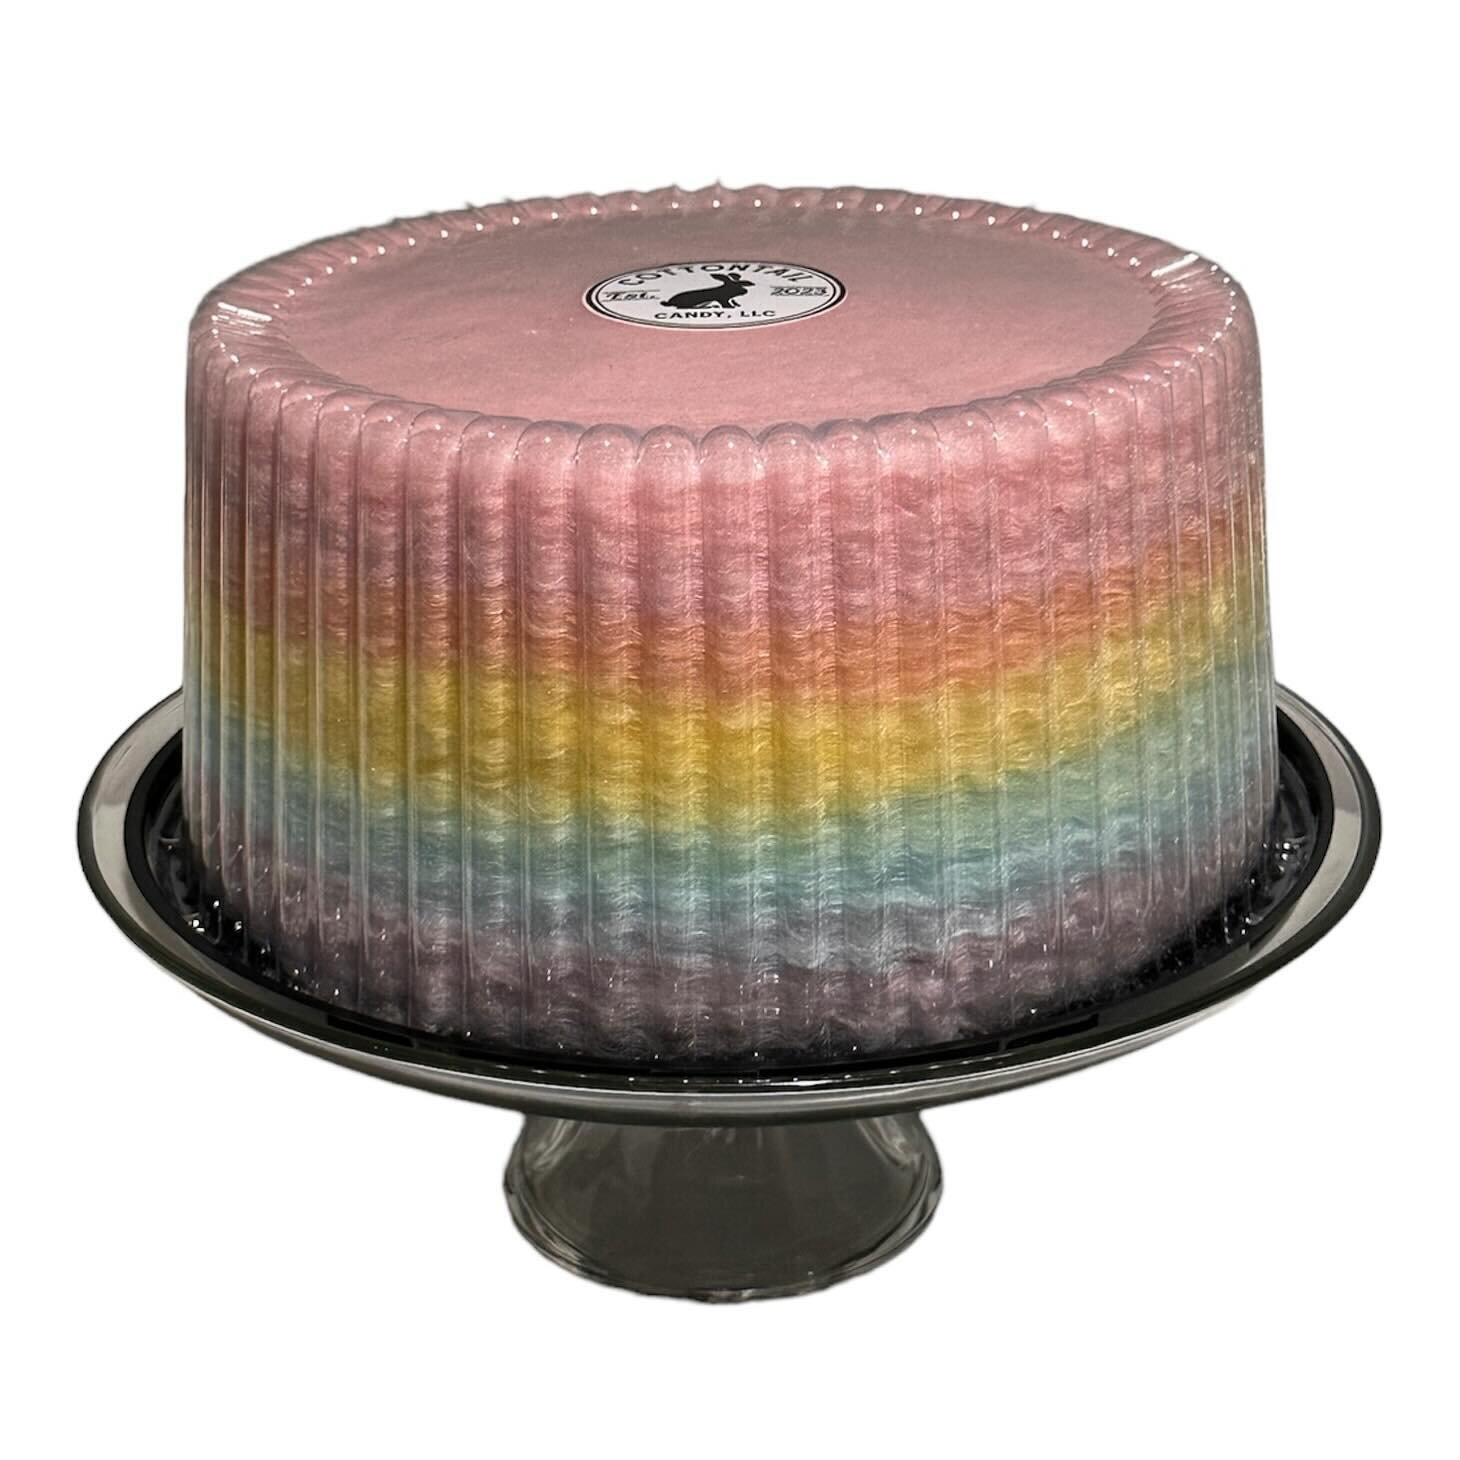 Another rainbow cake ready for a birthday! This cake is packed full of fluffy deliciousness! Layers are strawberry, orange, banana, lime, blue raspberry, and grape. Yum!